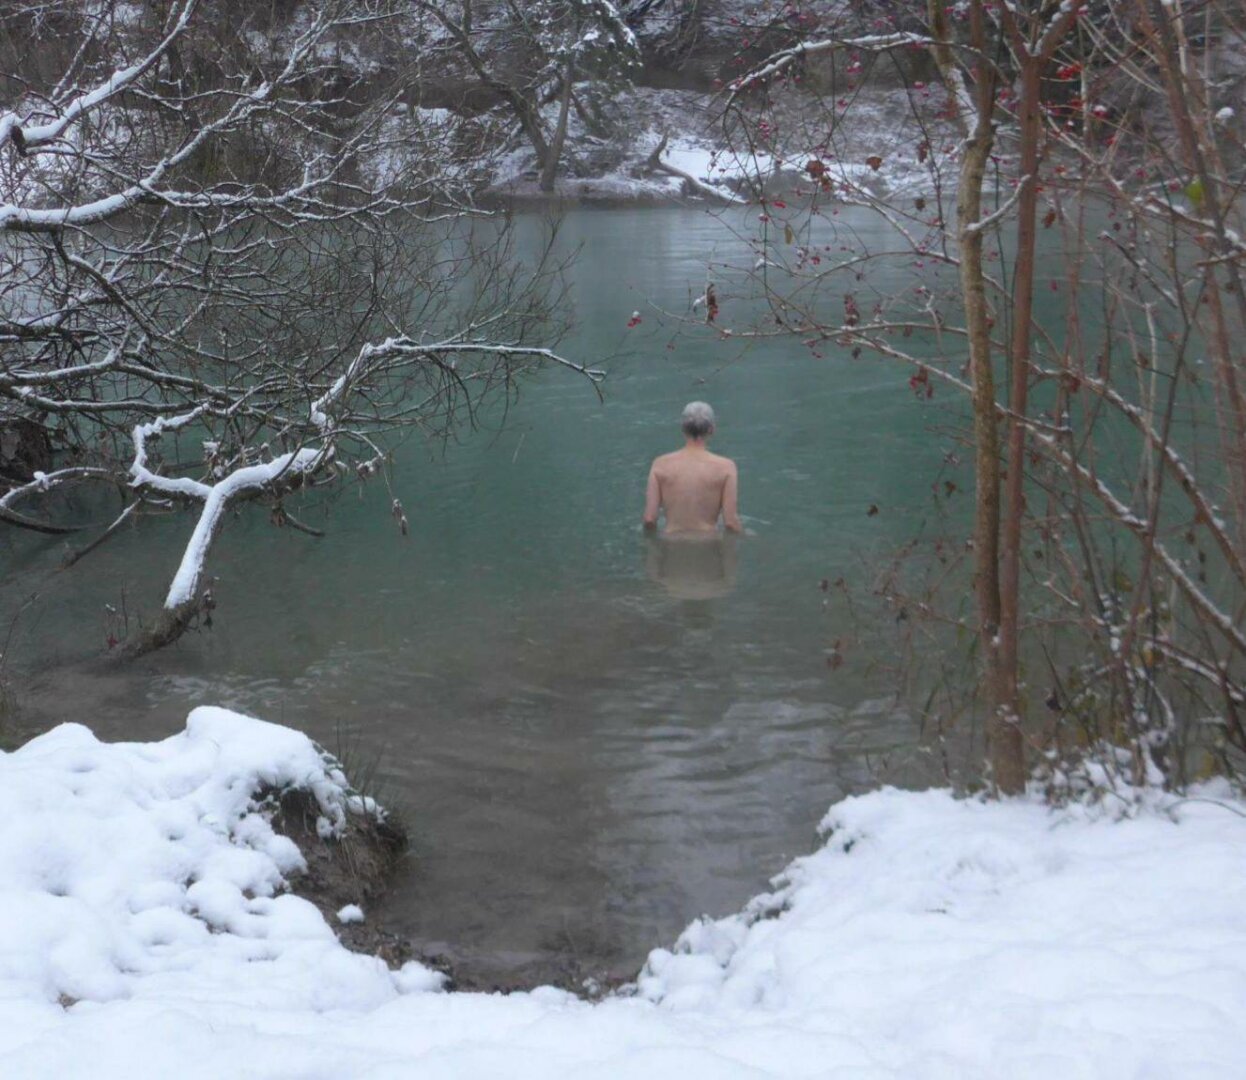 an image or two from my Pixelfed, shows a woman taking a dip in a river with snow on the floor